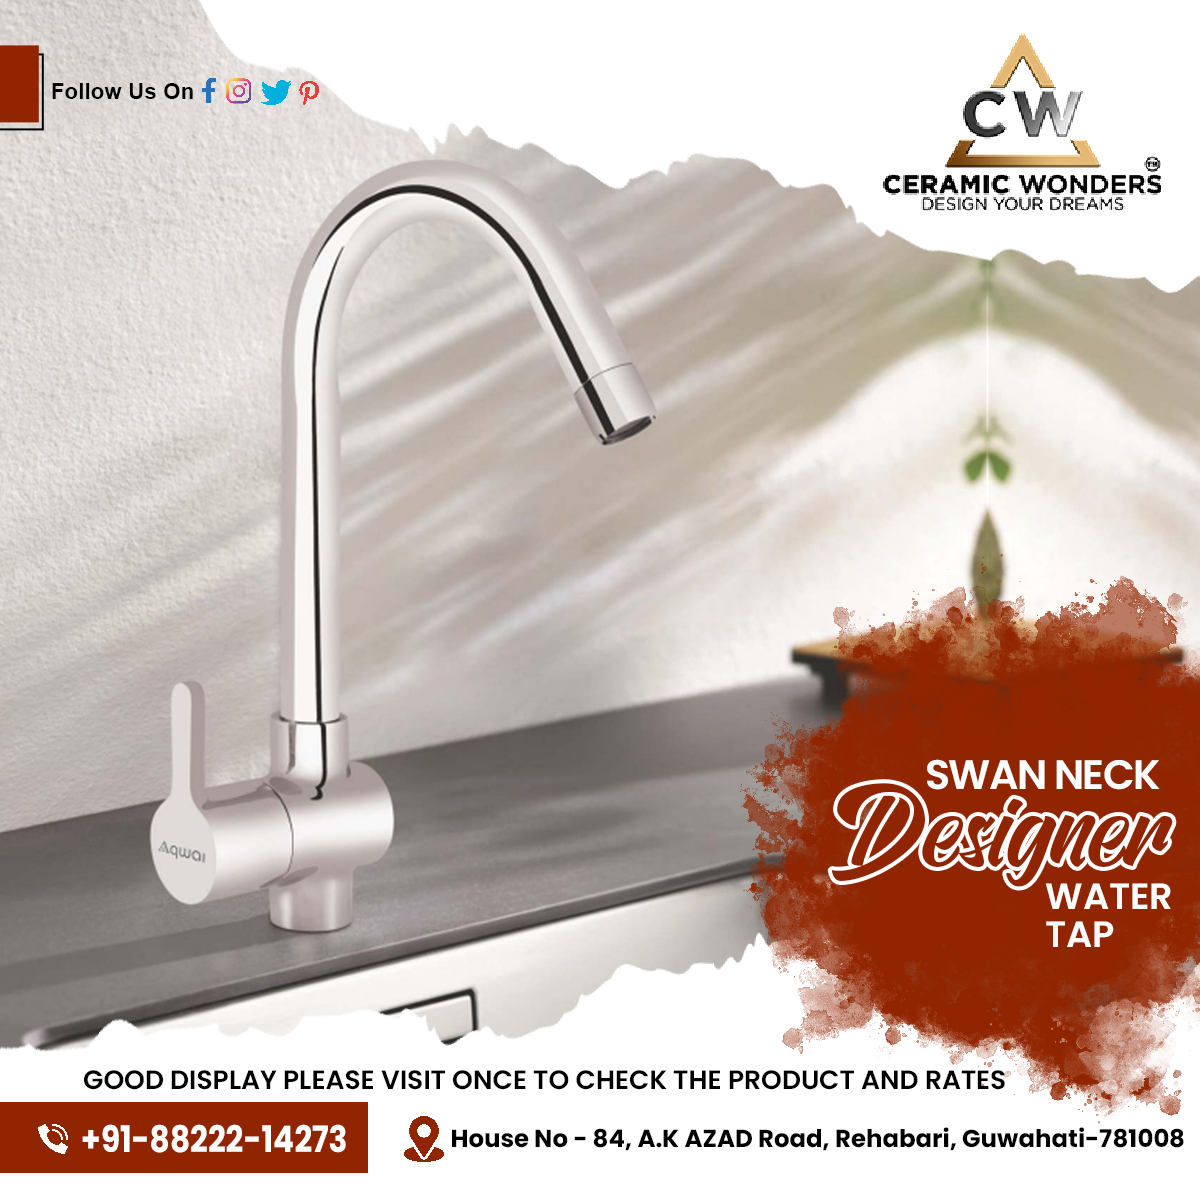 ✨🚰 Enhance the elegance of your home with this stunning piece of craftsmanship, handcrafted in Rehabari, Gujarat. 💧🏺

#CeramicWonders #SwanNeckTap #DesignerWaterTap #HomeDecor #ElegantLiving #Craftsmanship #GujaratArtistry #RehabariPride #LuxuryLiving #ArtisanMade #Functional